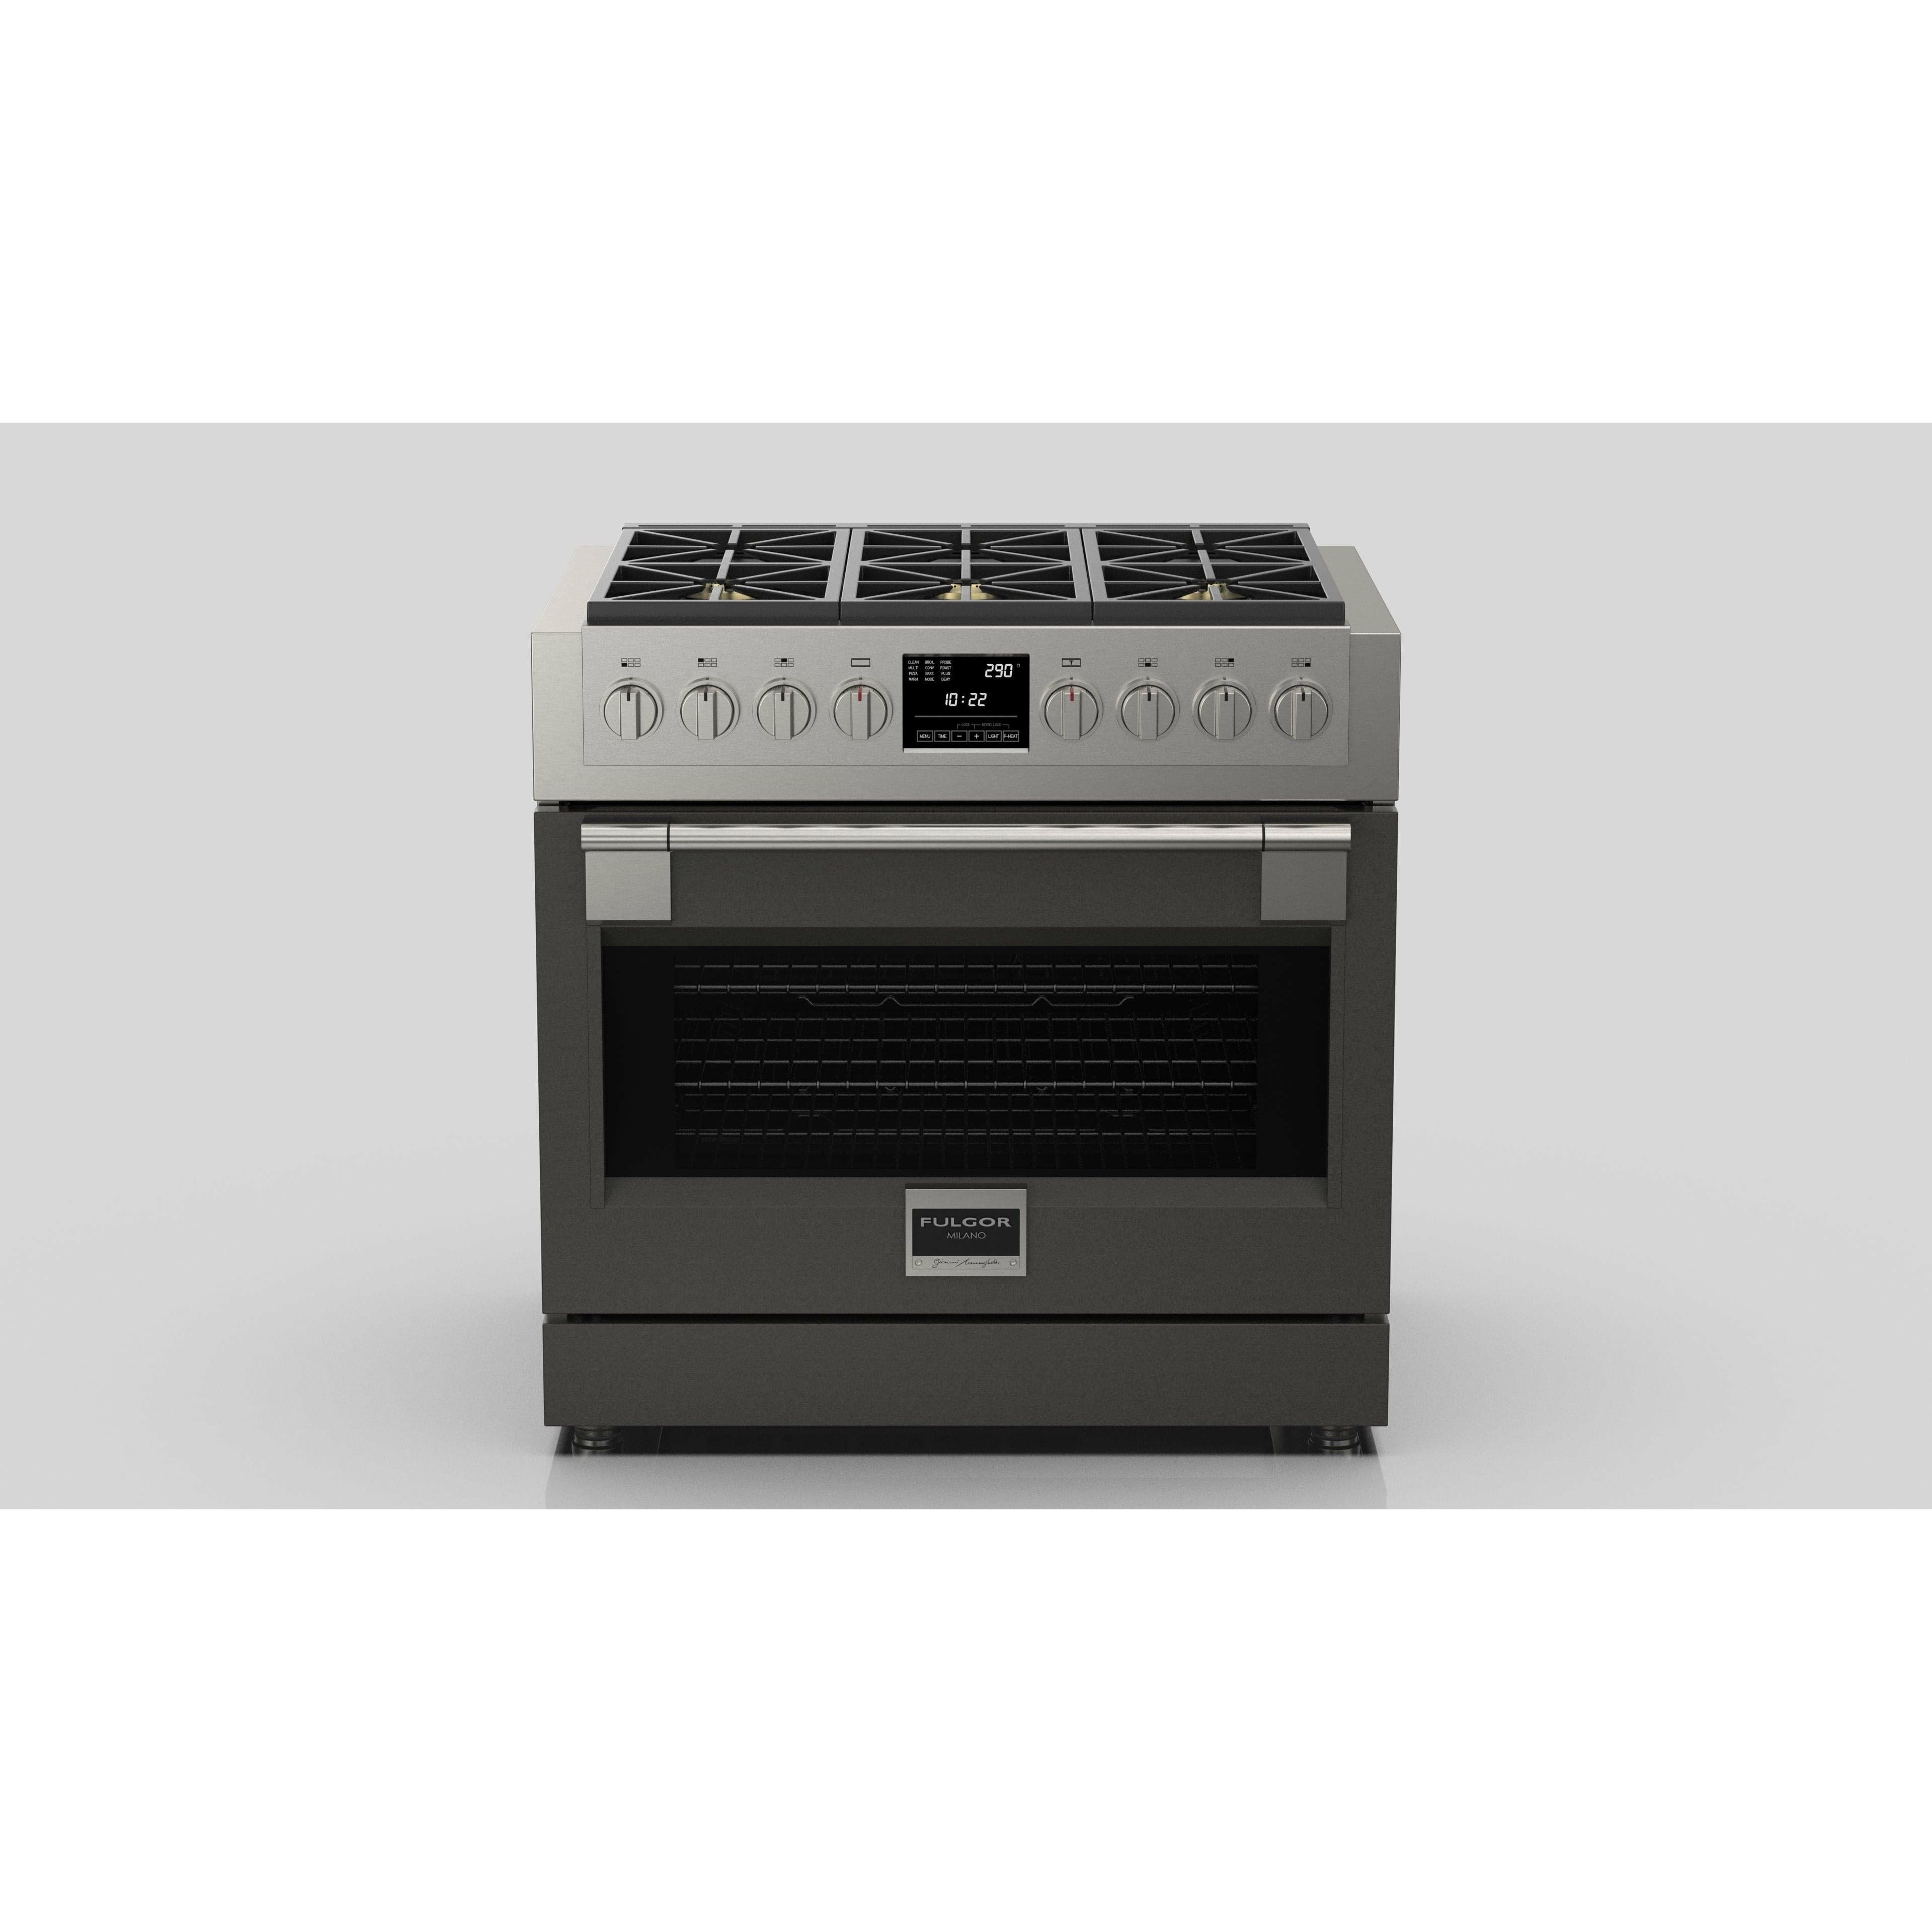 Fulgor Milano 36" Freestanding Dual Pro Fuel Range with Four 18,000 BTU Burners, Stainless Steel - F6PDF366S1 Ranges PDRKIT36MG Luxury Appliances Direct